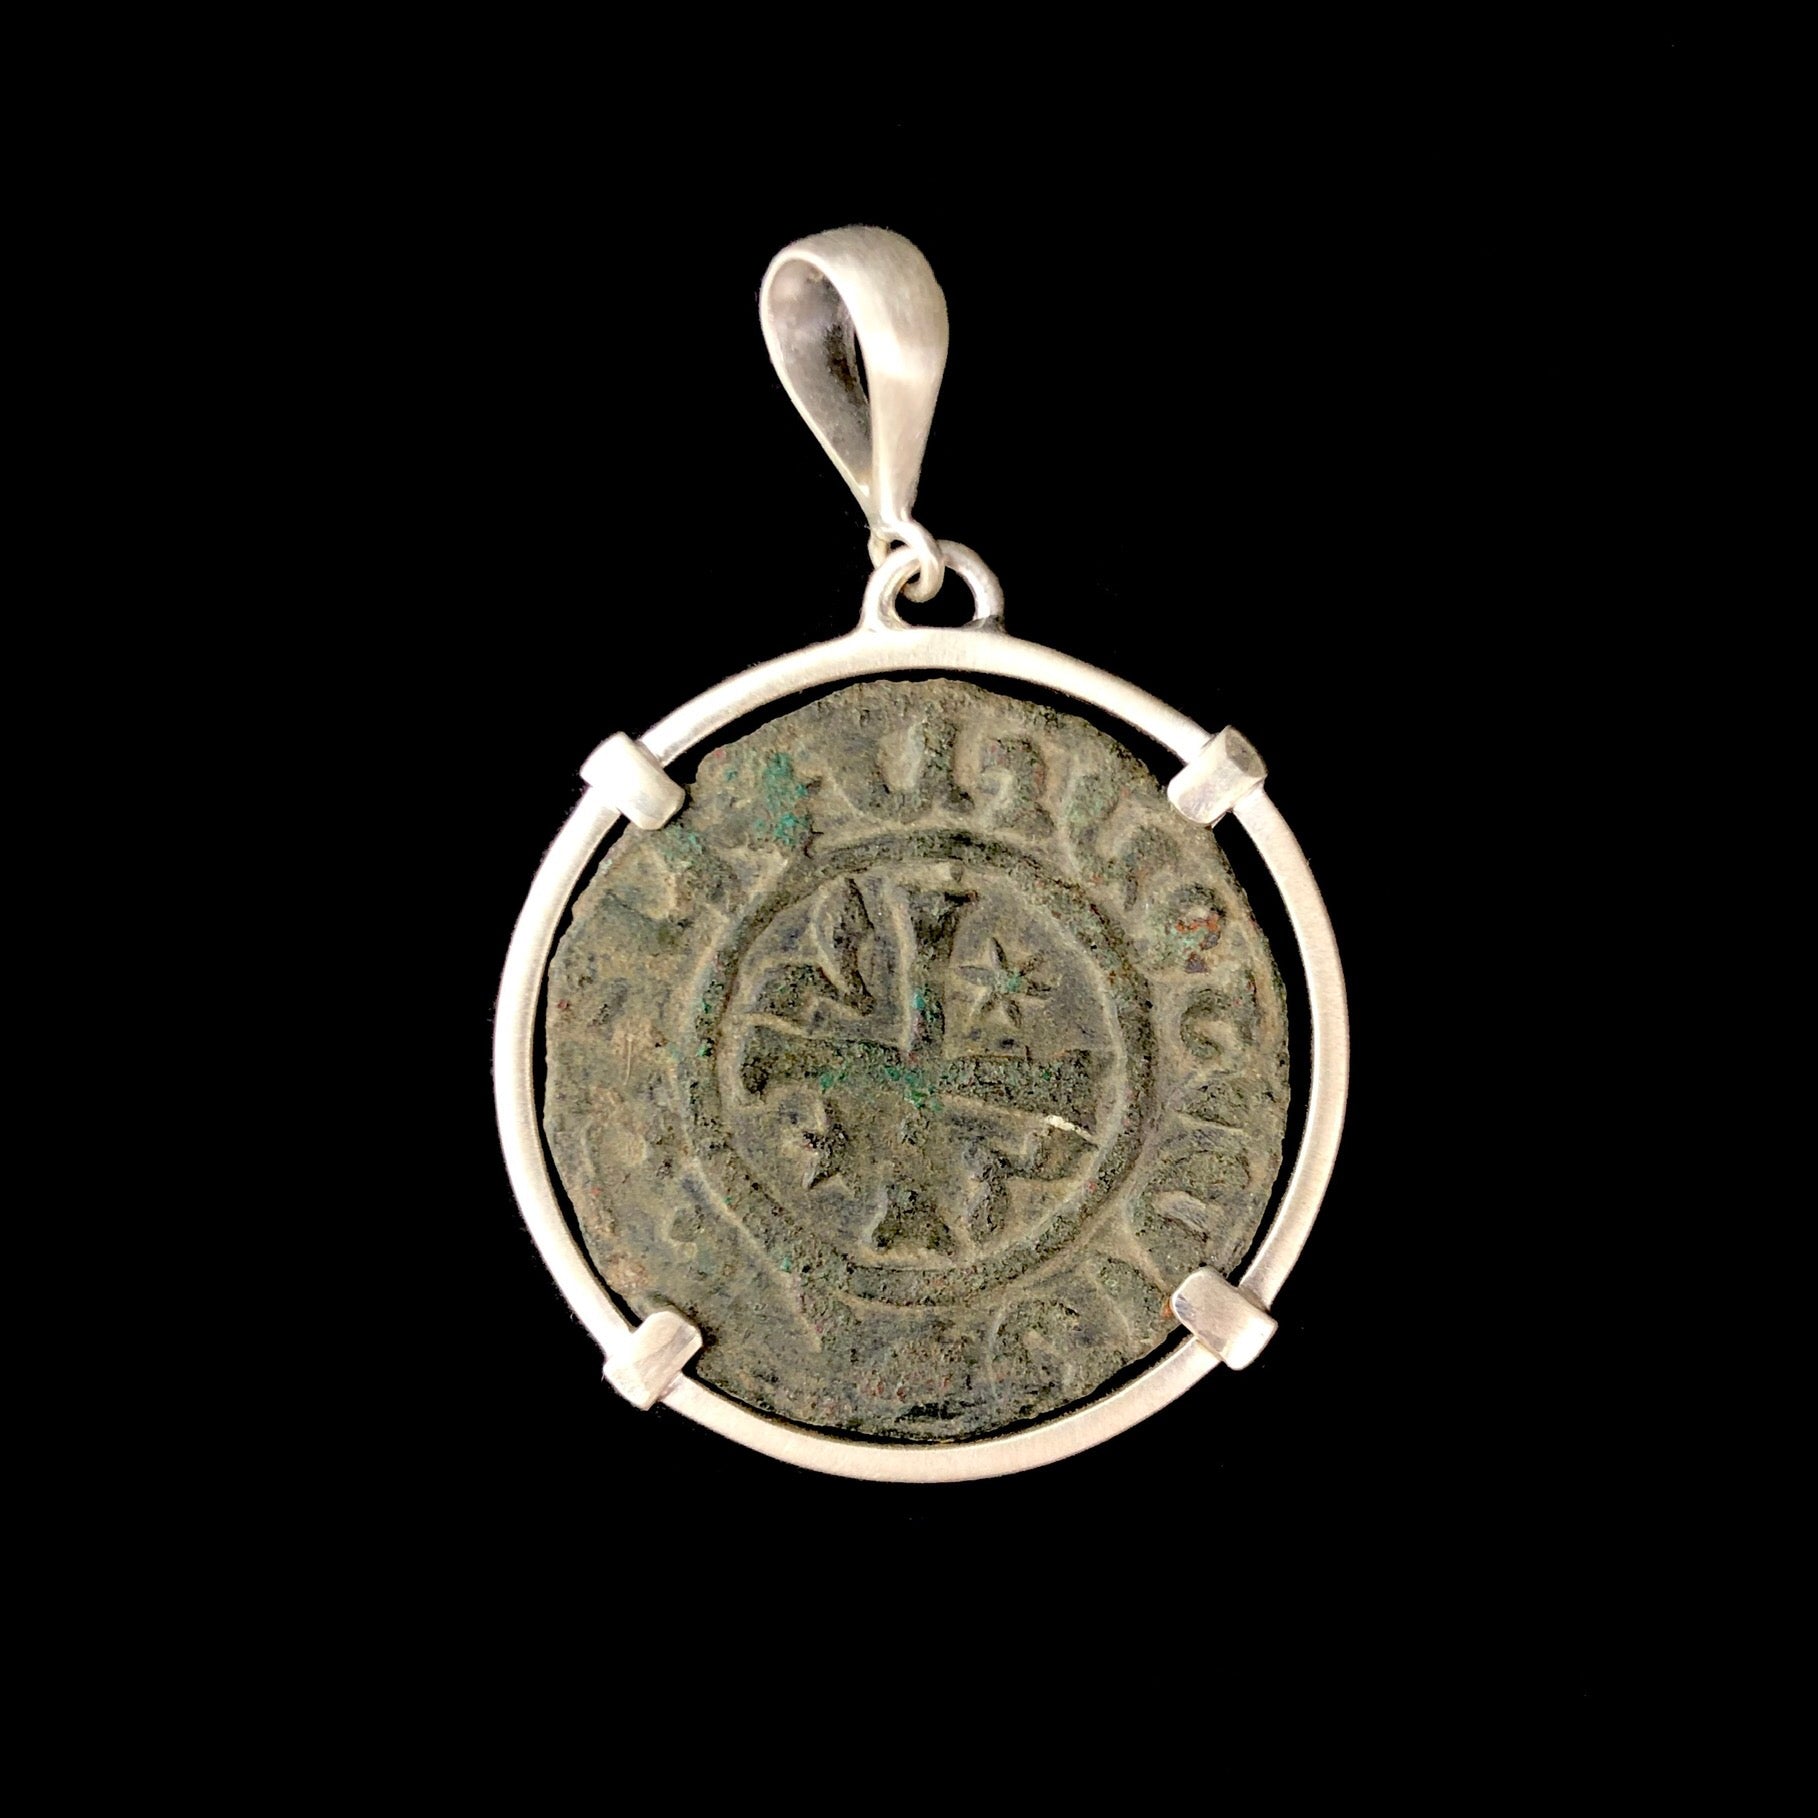 Crusade Coin Pendent with centered cross surrounded by letters